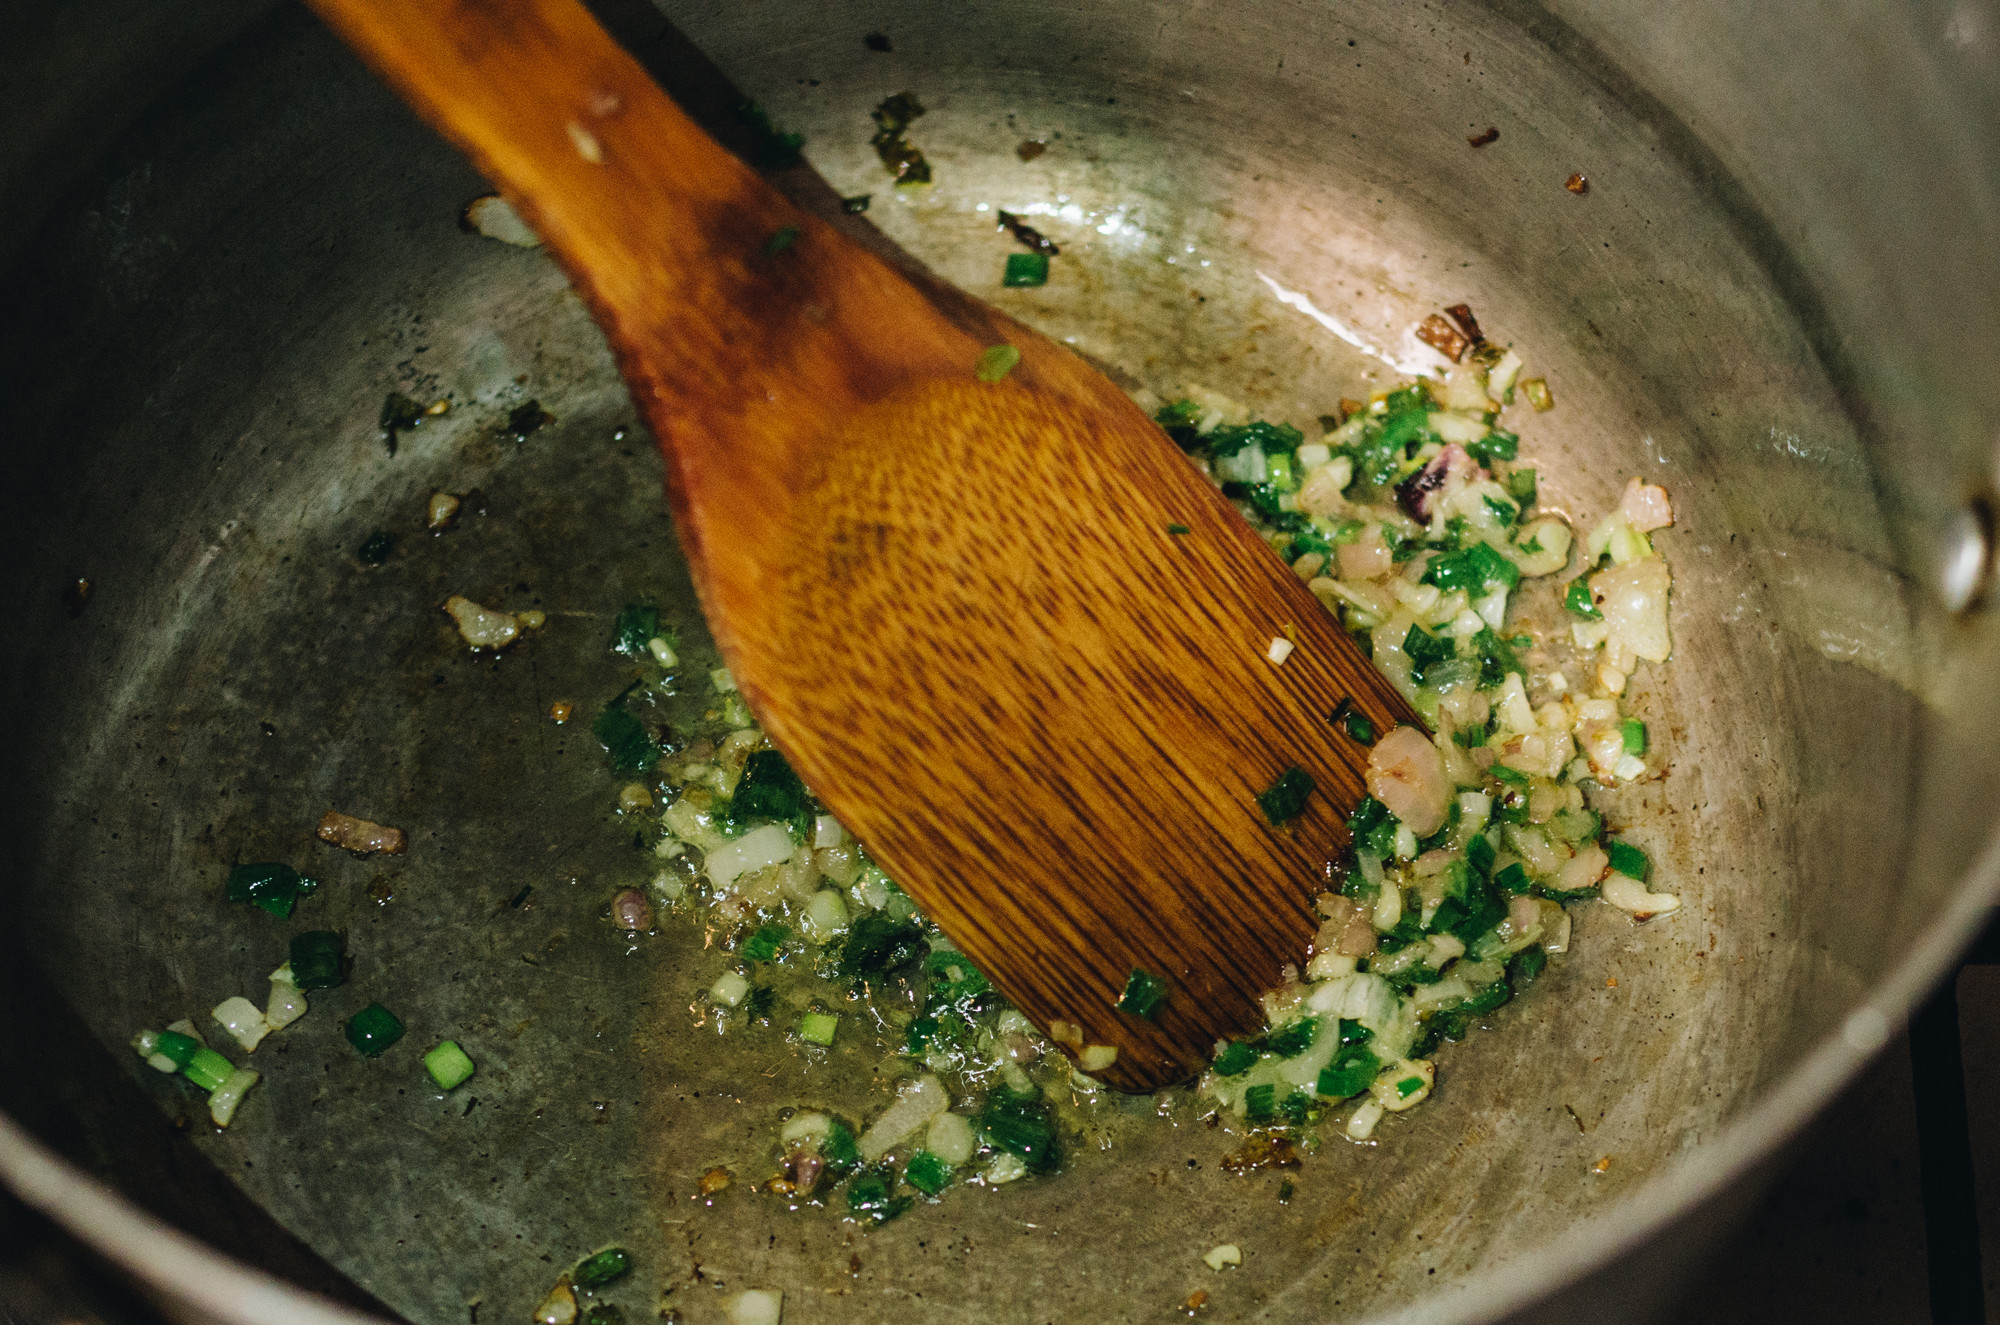 A close up of garlic being sauted in a pan with a wooden spoon